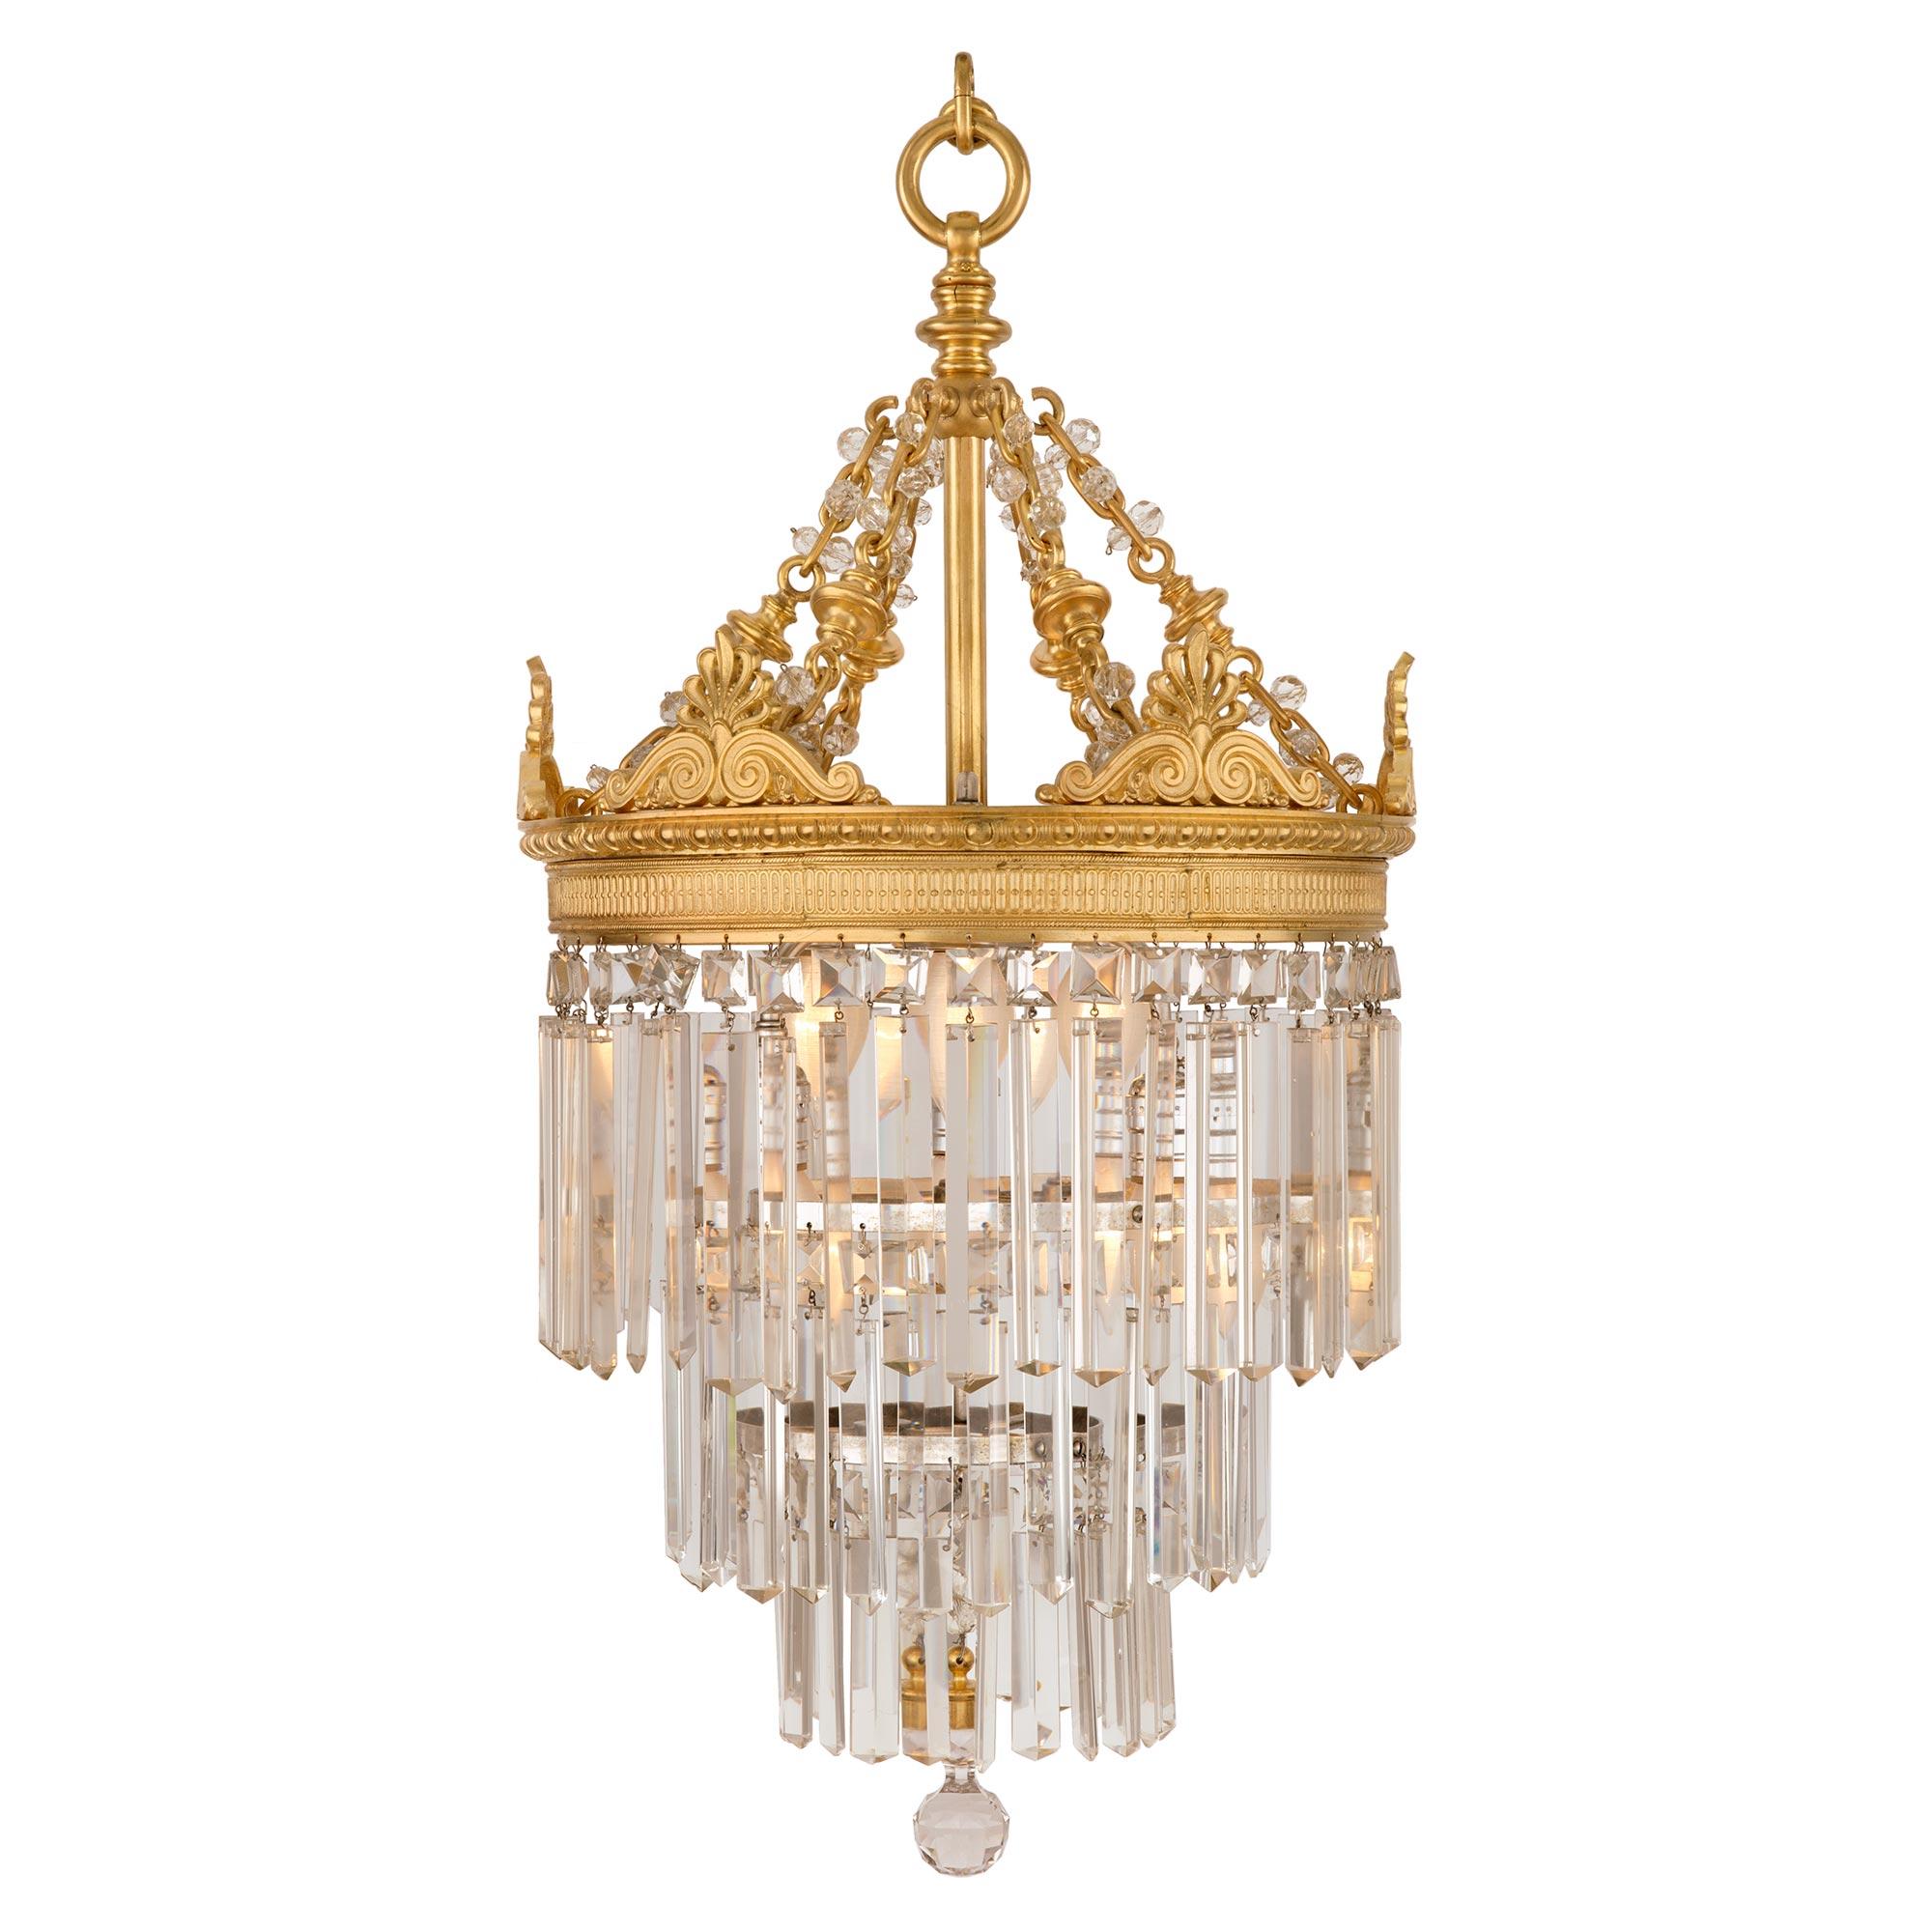 A fabulous French 19th century neoclassical St. ormolu and Baccarat crystal chandelier. The chandelier displays an elegant cut crystal ball centered by three tiers of most decorative prism shaped cut crystal pendants tied to silvered bronze